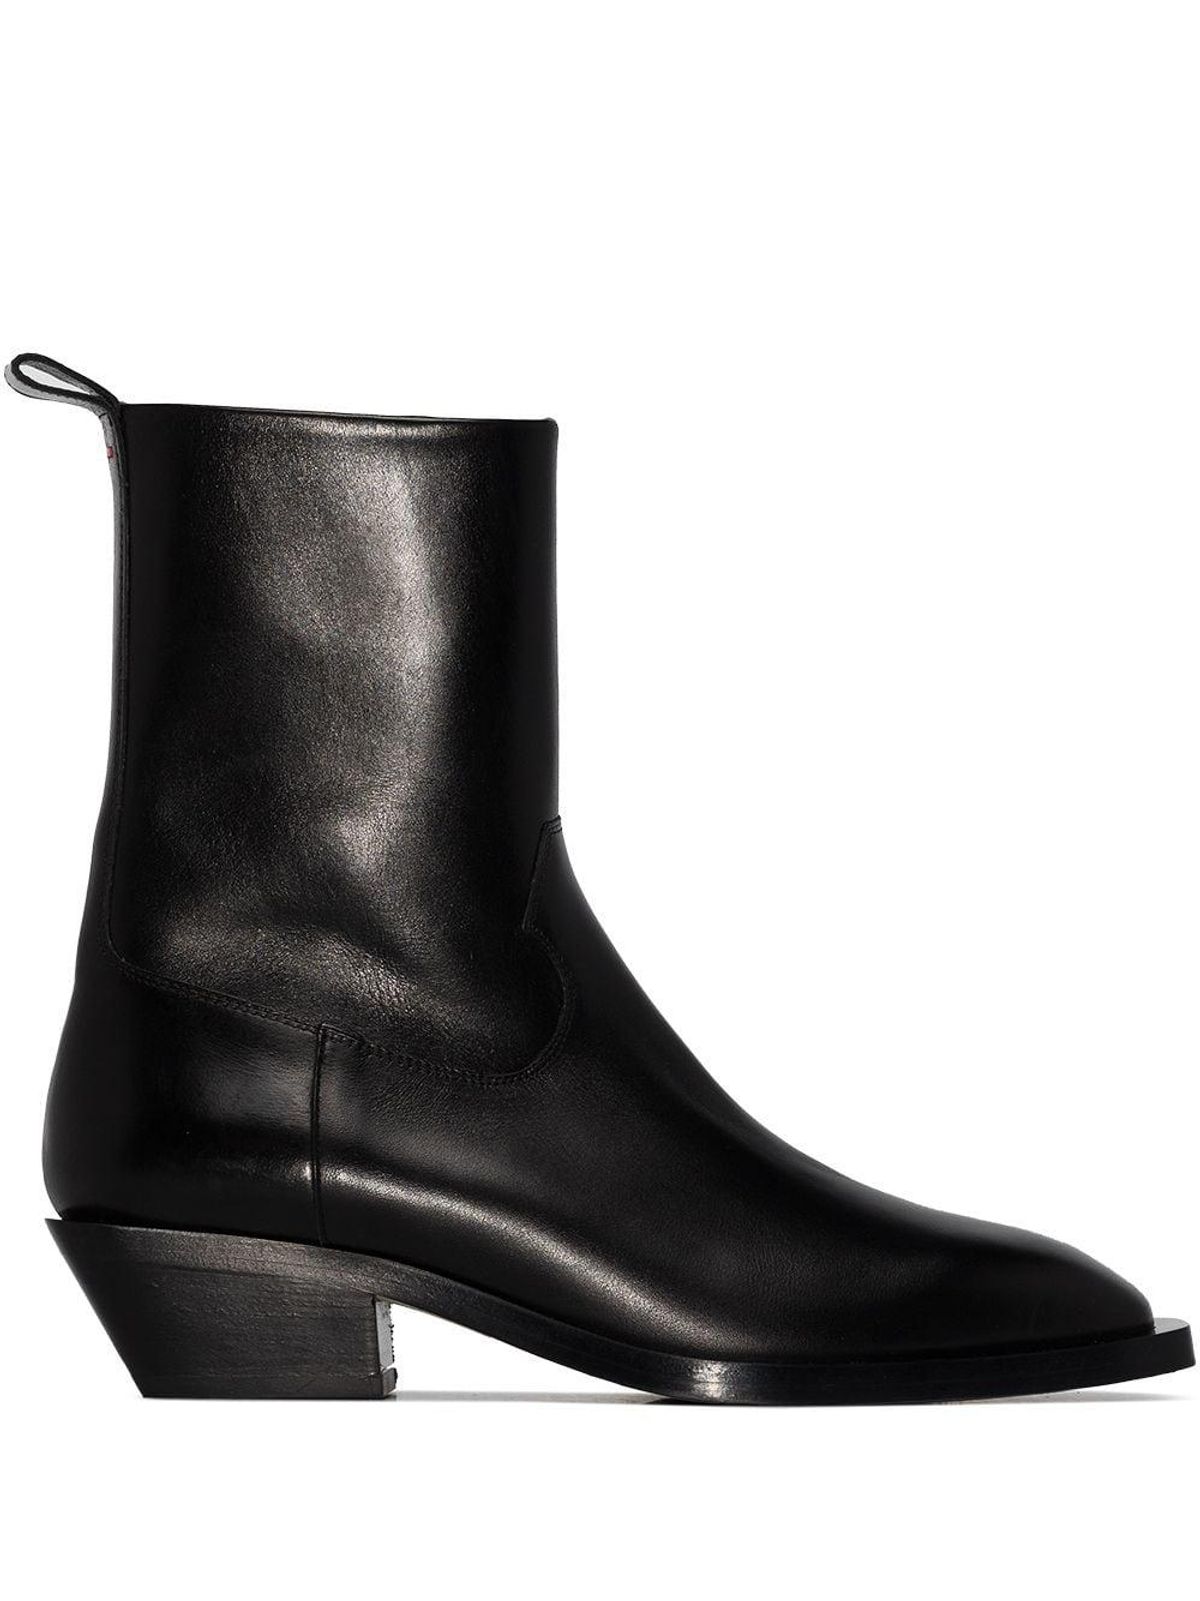 Luis Pointed-Toe Boots